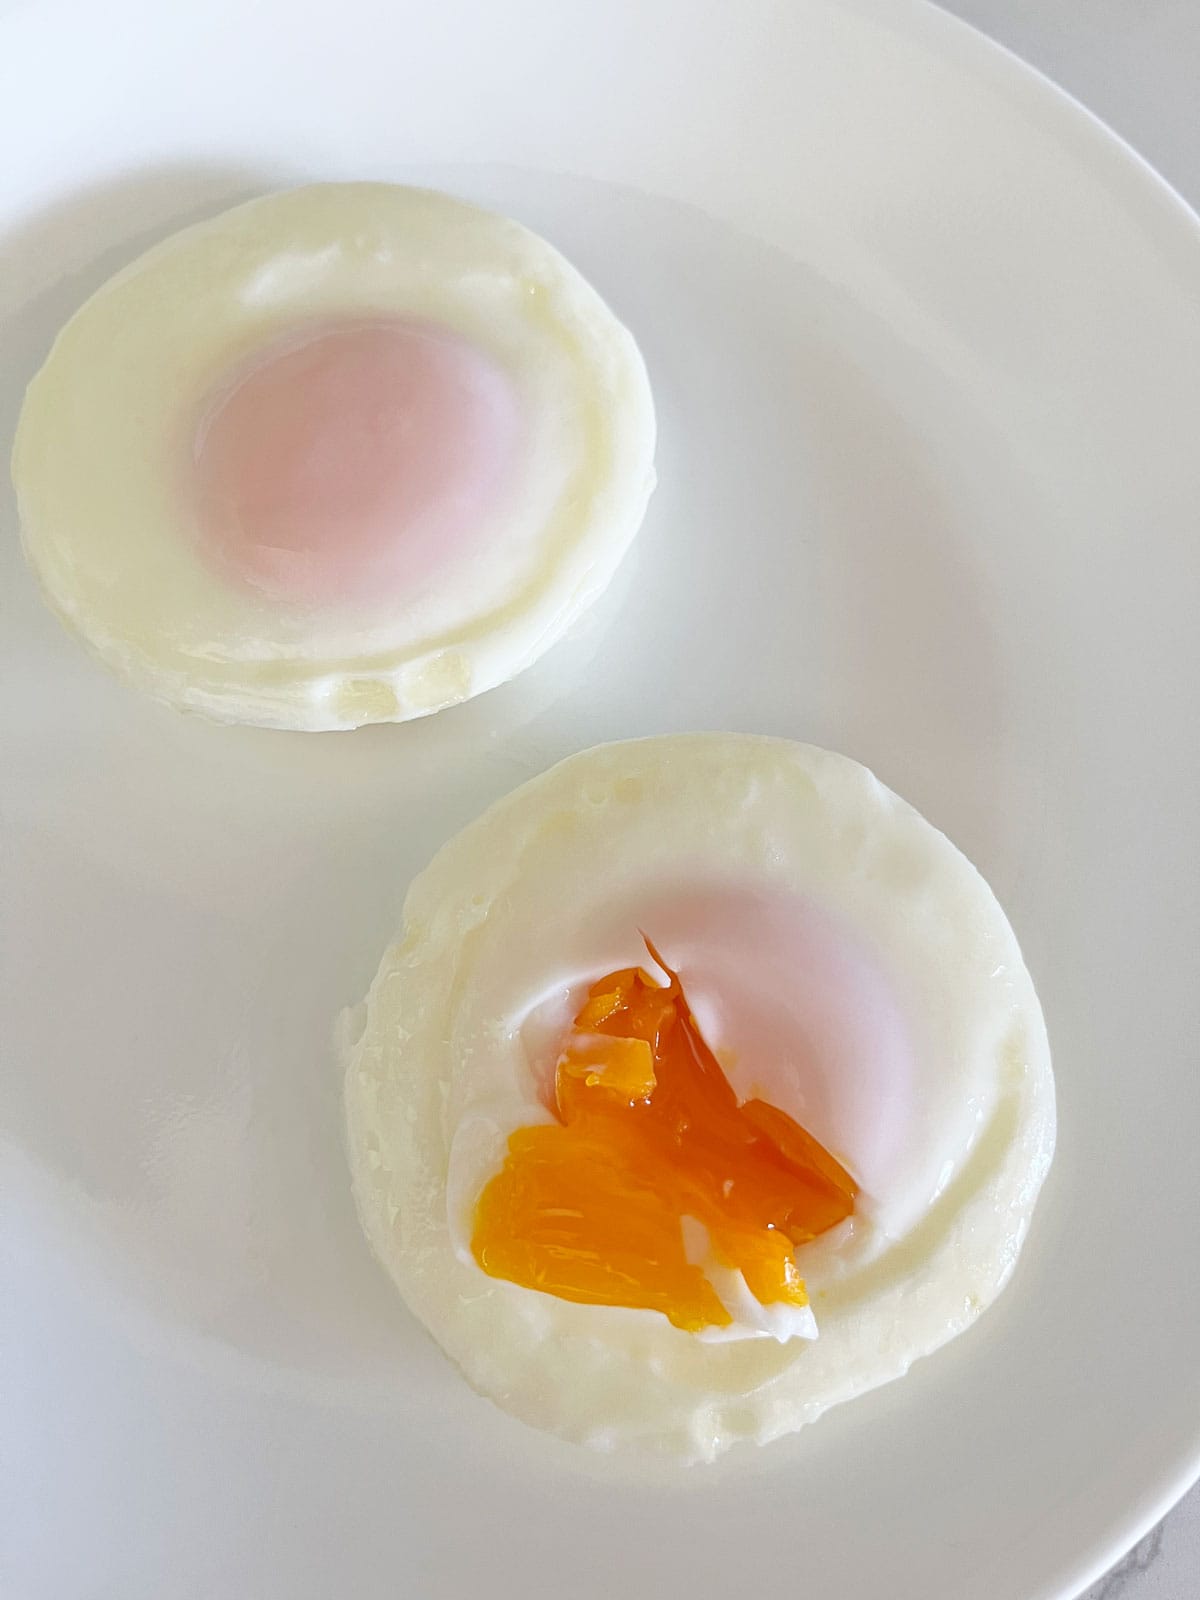 Two eggs that were poached in a stovetop egg poached for four minutes.